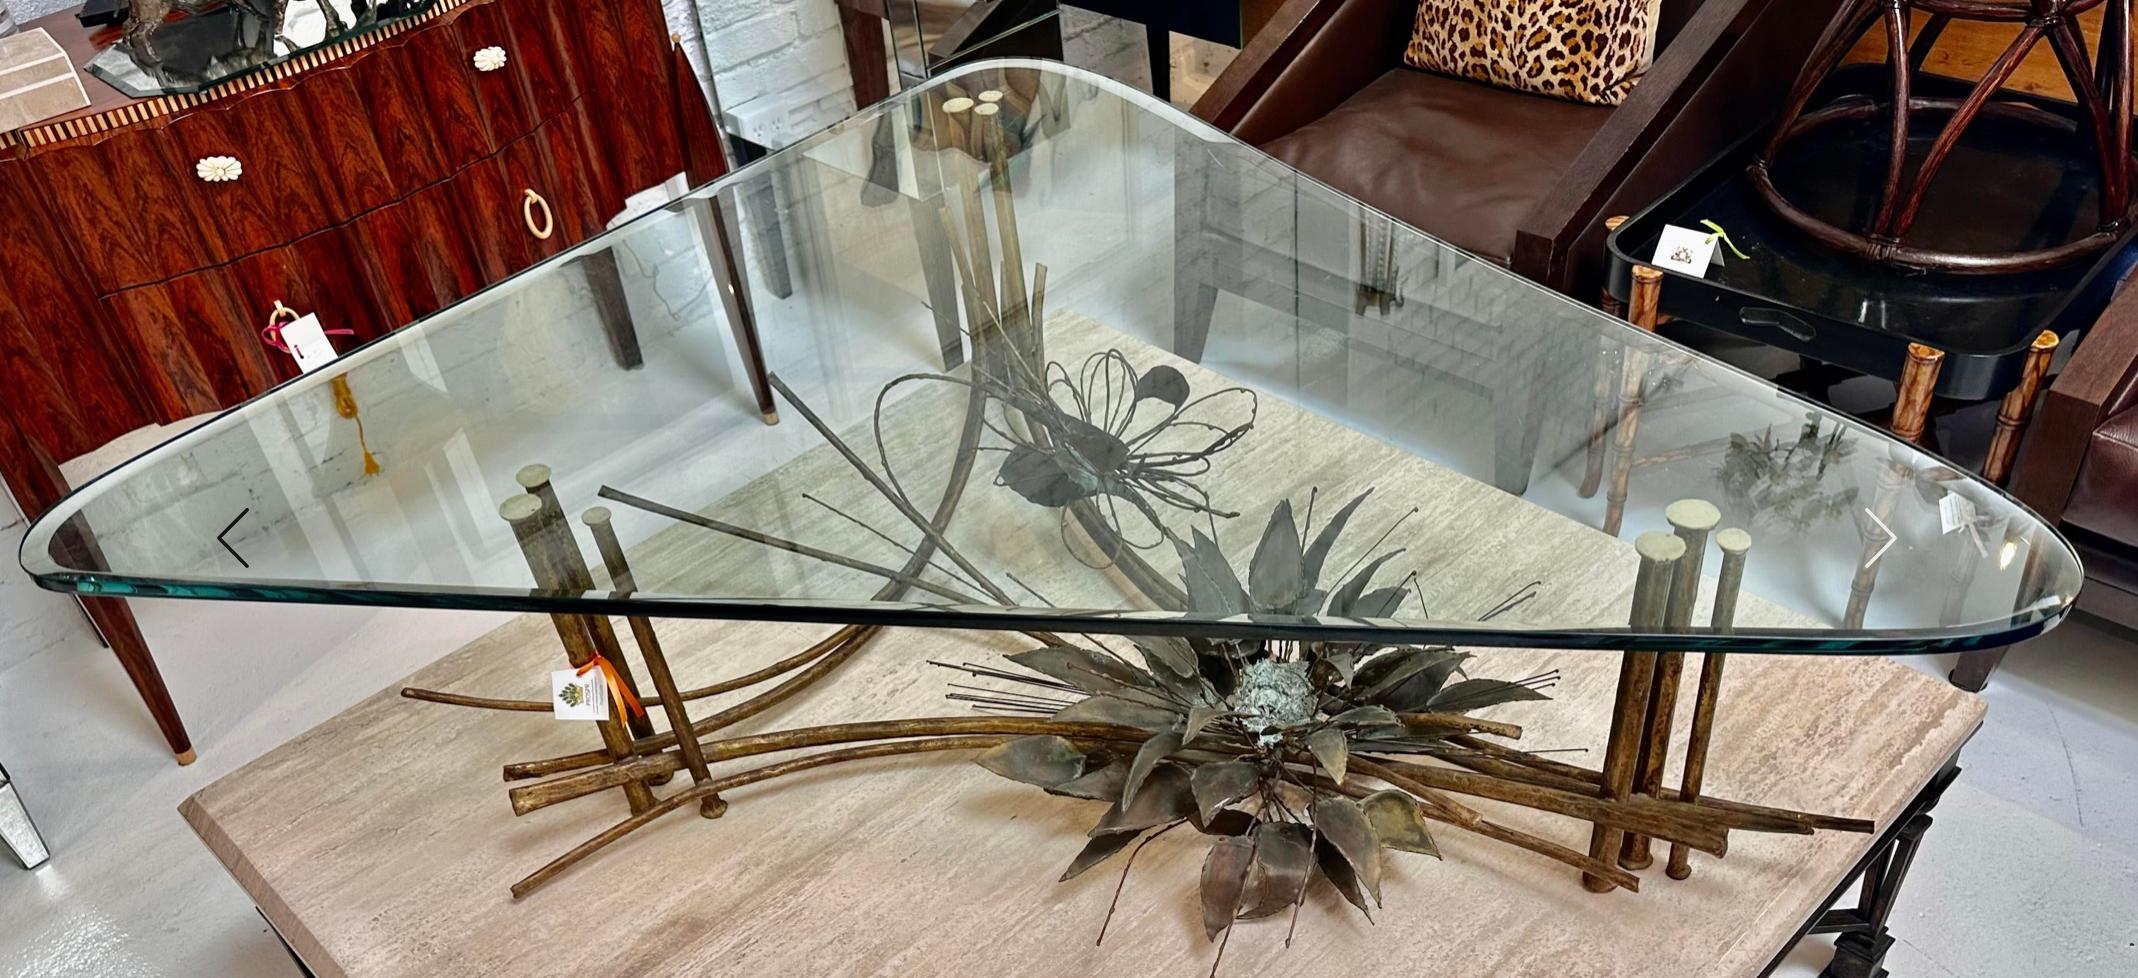 Incredible Brutalist Brass Based Cocktail or Coffee Table, Midcentury Modern. It has an unusual form with an abstract insect and flower base with a faux bamboo frame. The reverse beveled glass top with a custom form.